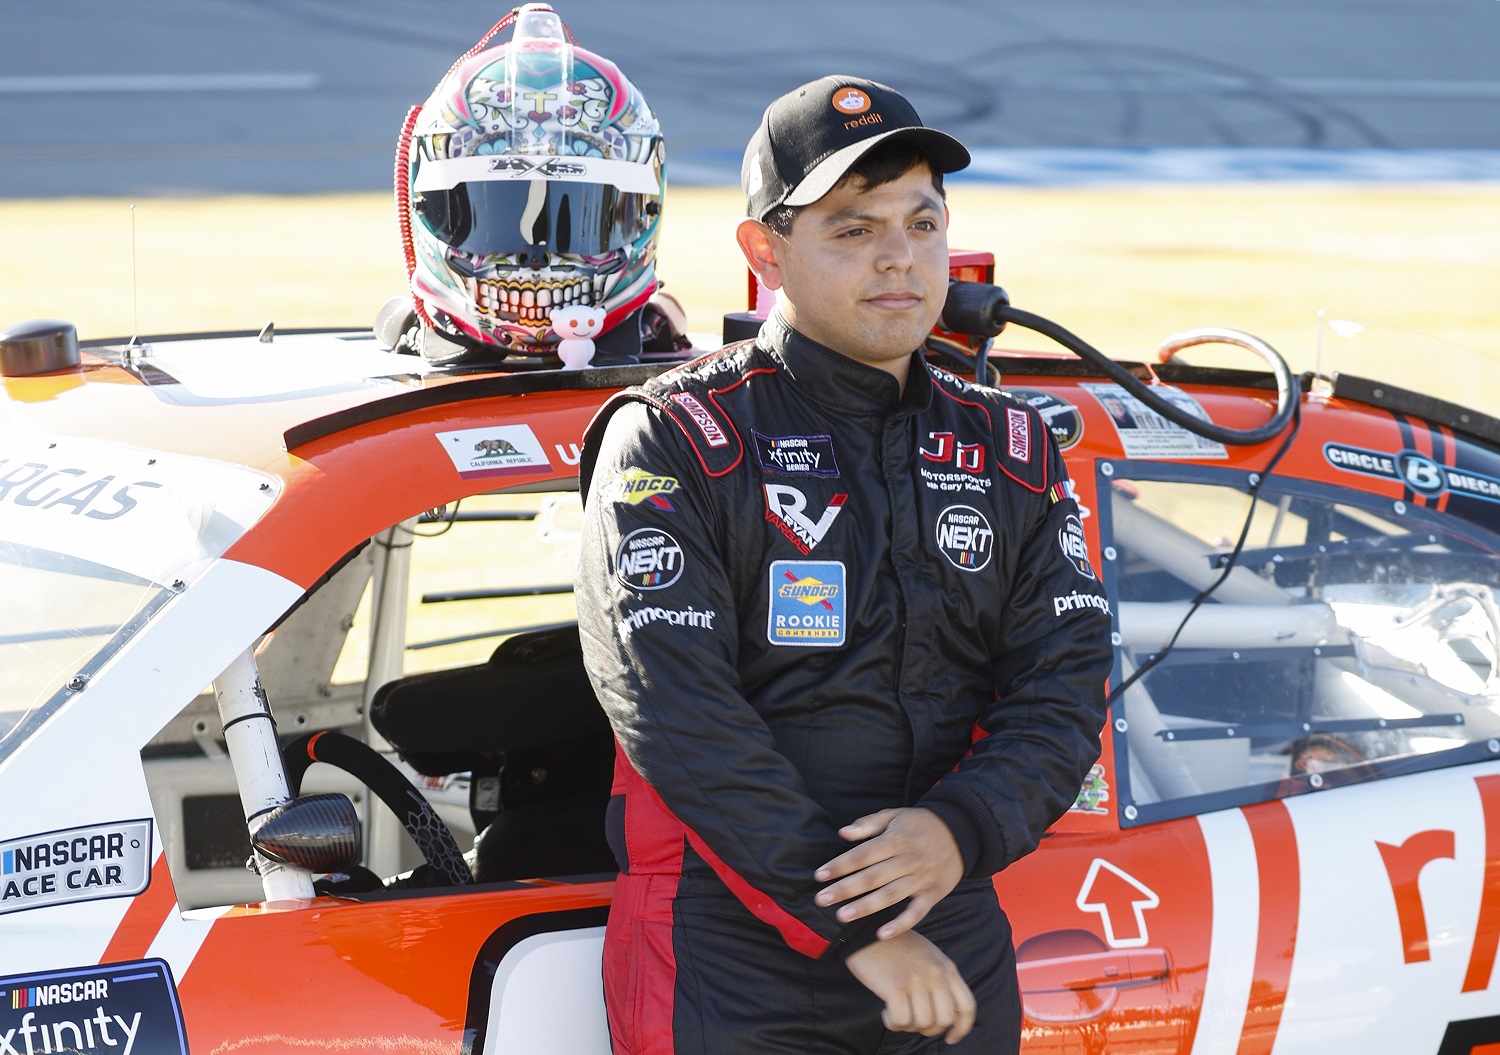 Ryan Vargas waits on the grid during qualifying for the NASCAR Xfinity Series Sparks 300 at Talladega Superspeedway on Sept. 30, 2022. | Chris Graythen/Getty Images